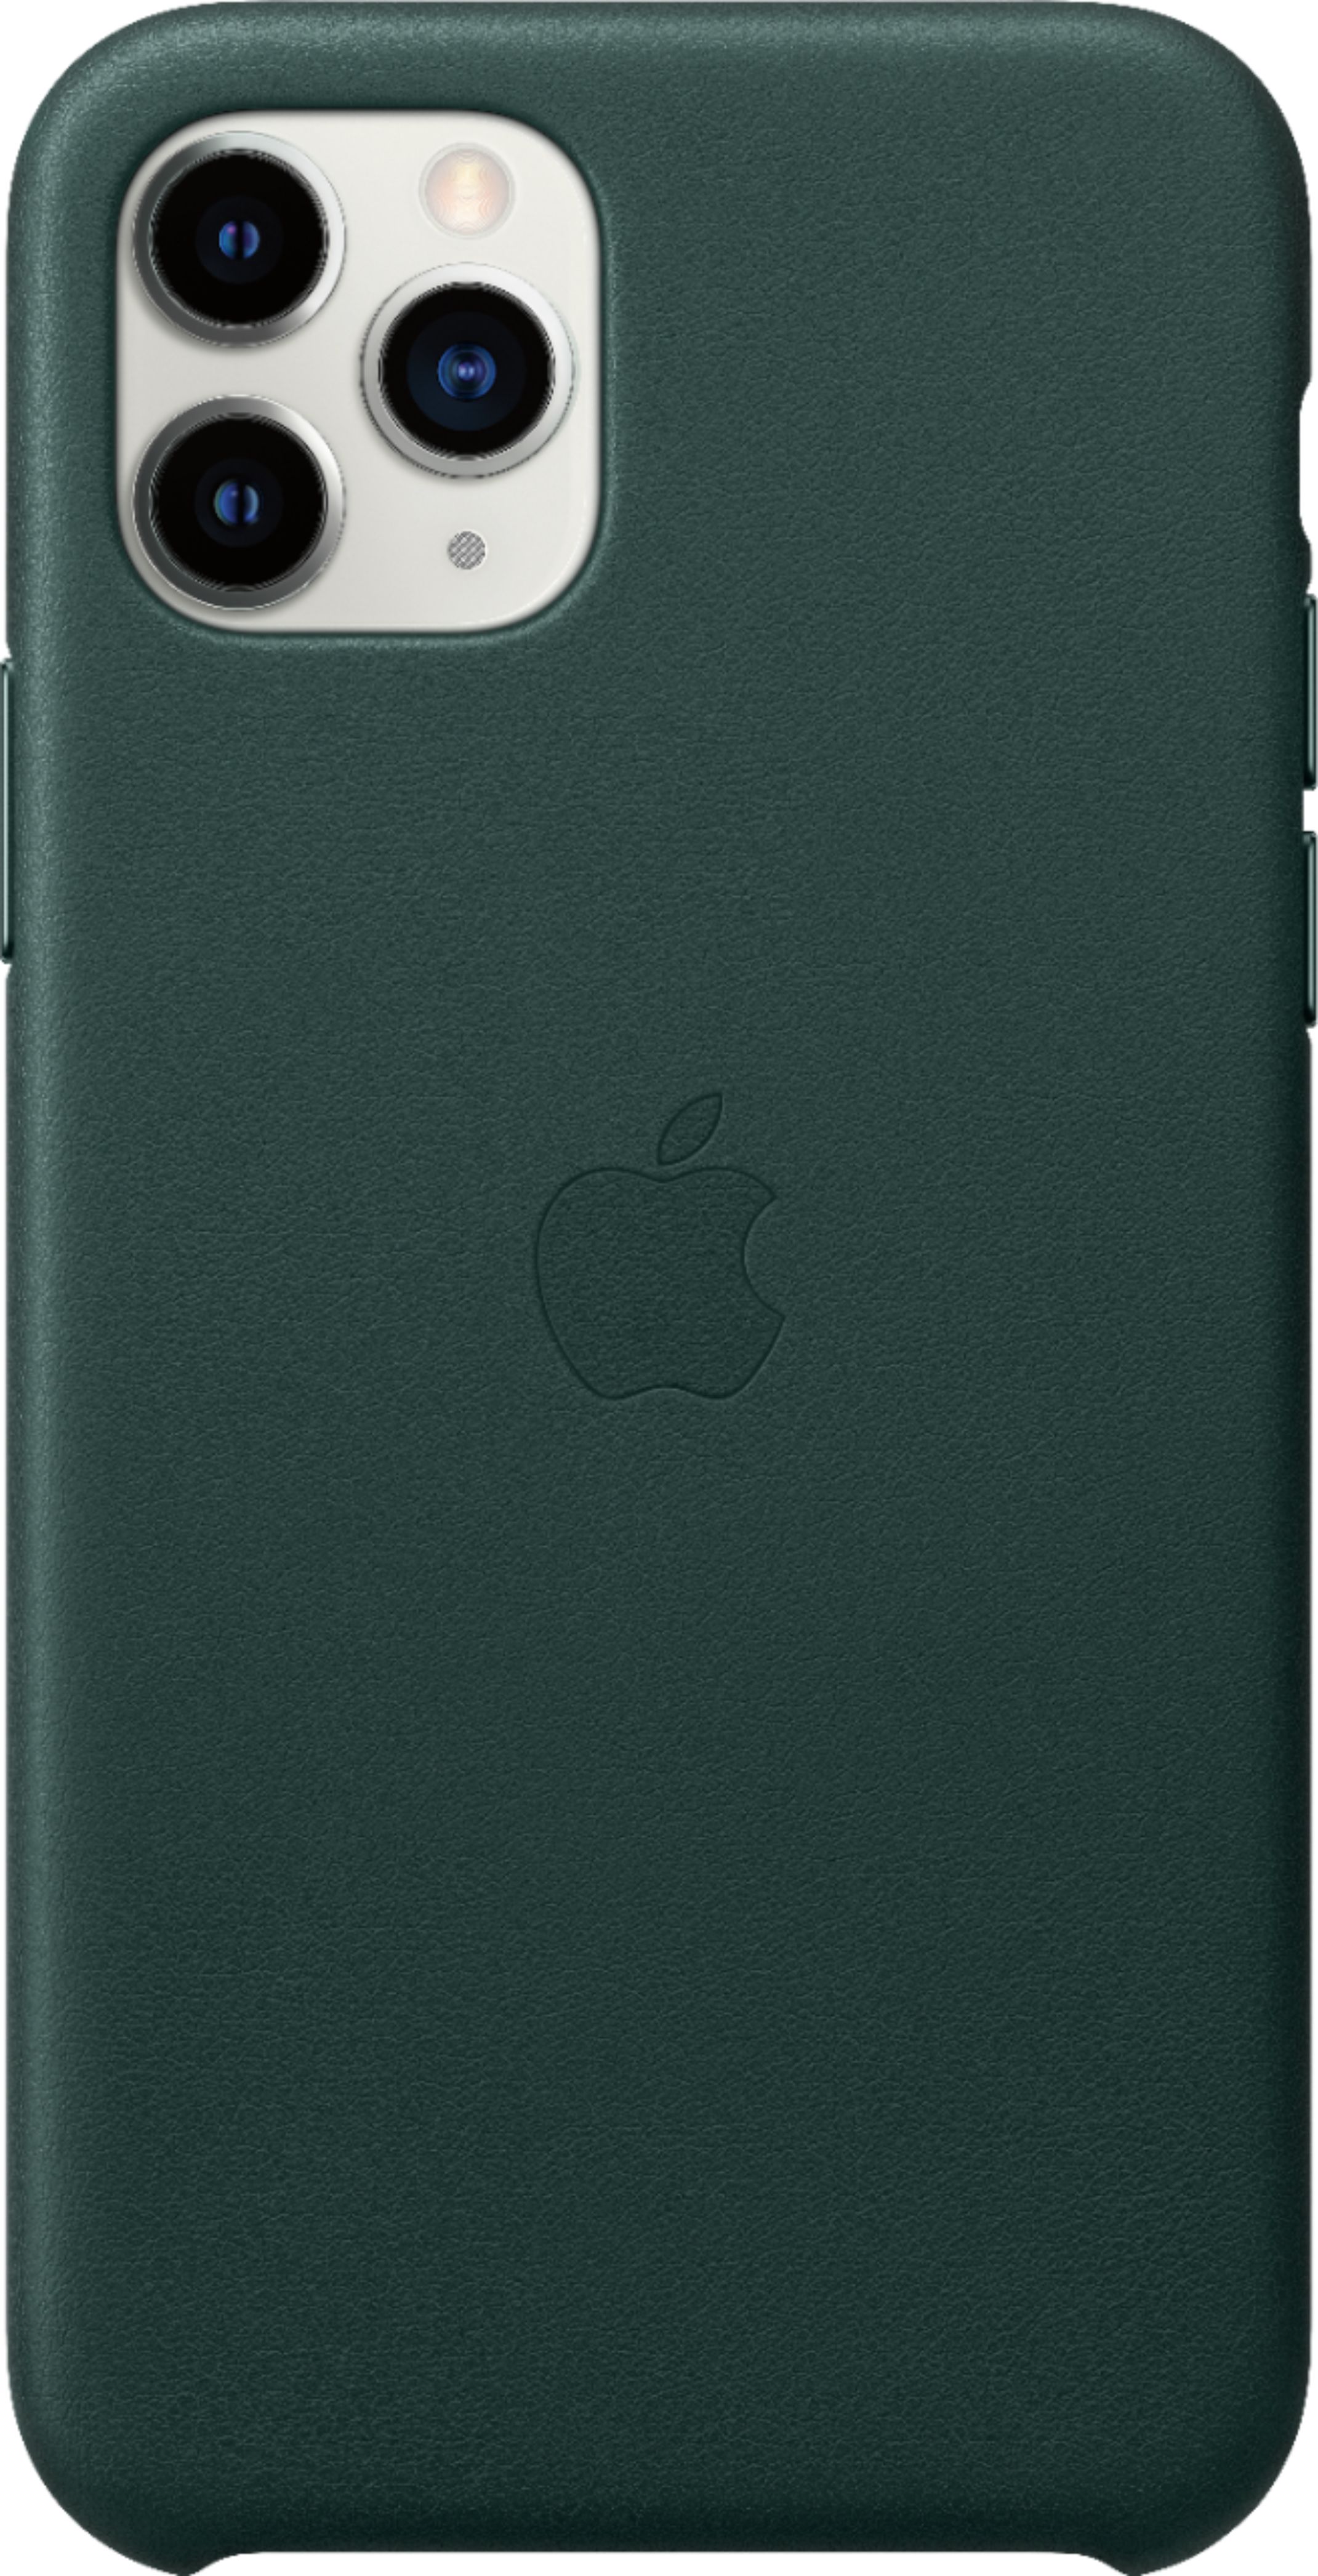 Iphone 11 Pro Case - Buy Iphone 11 Pro Case online at Best Prices